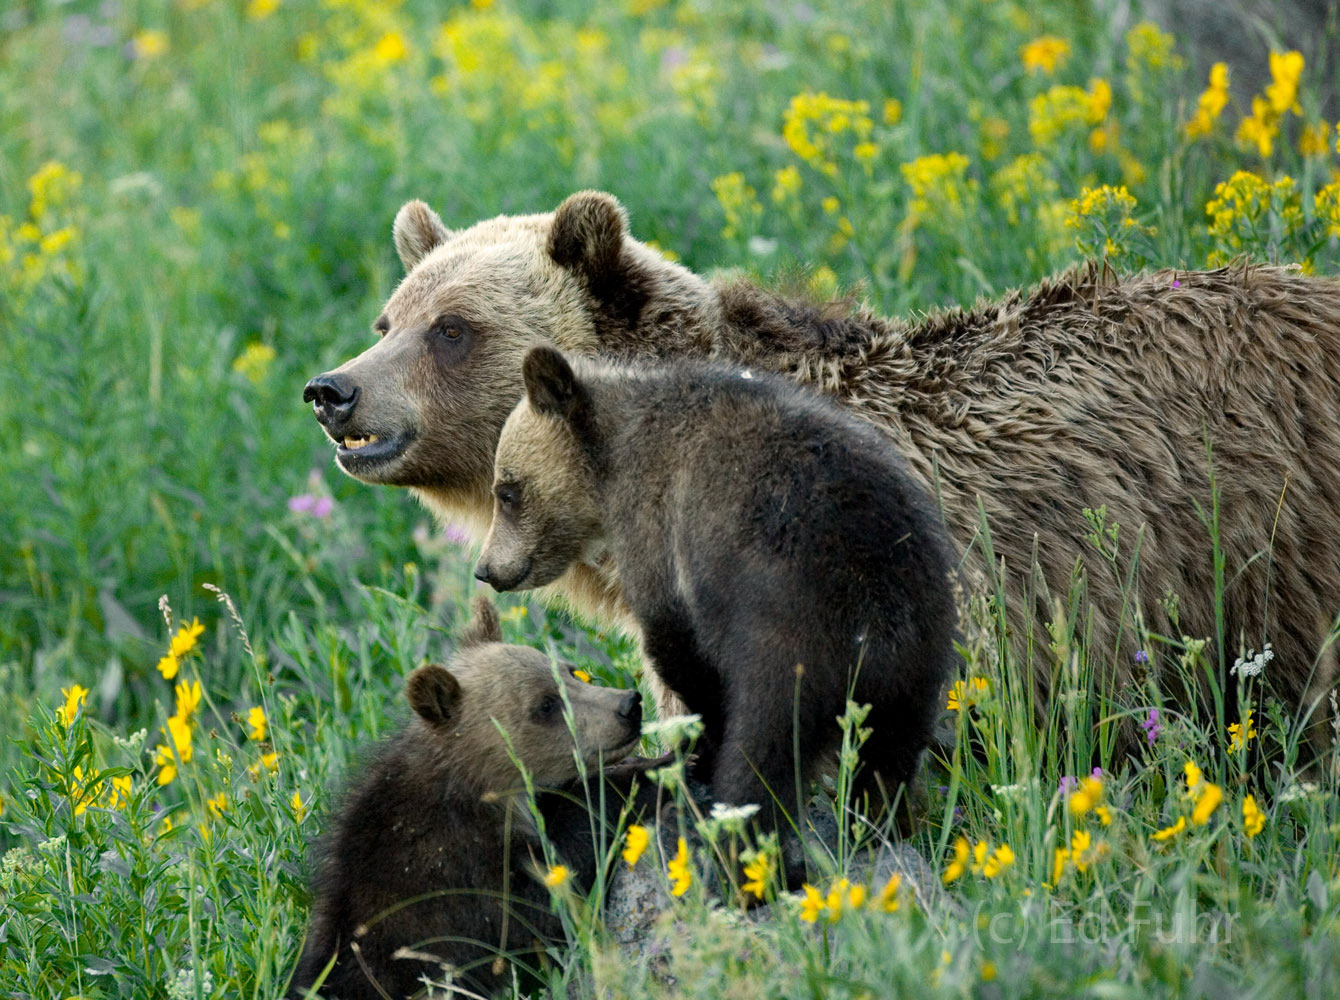 A grizzly and her two cubs pause after eating wildflowers, ground squirrels and ants to take in the view near Mount Washburn...